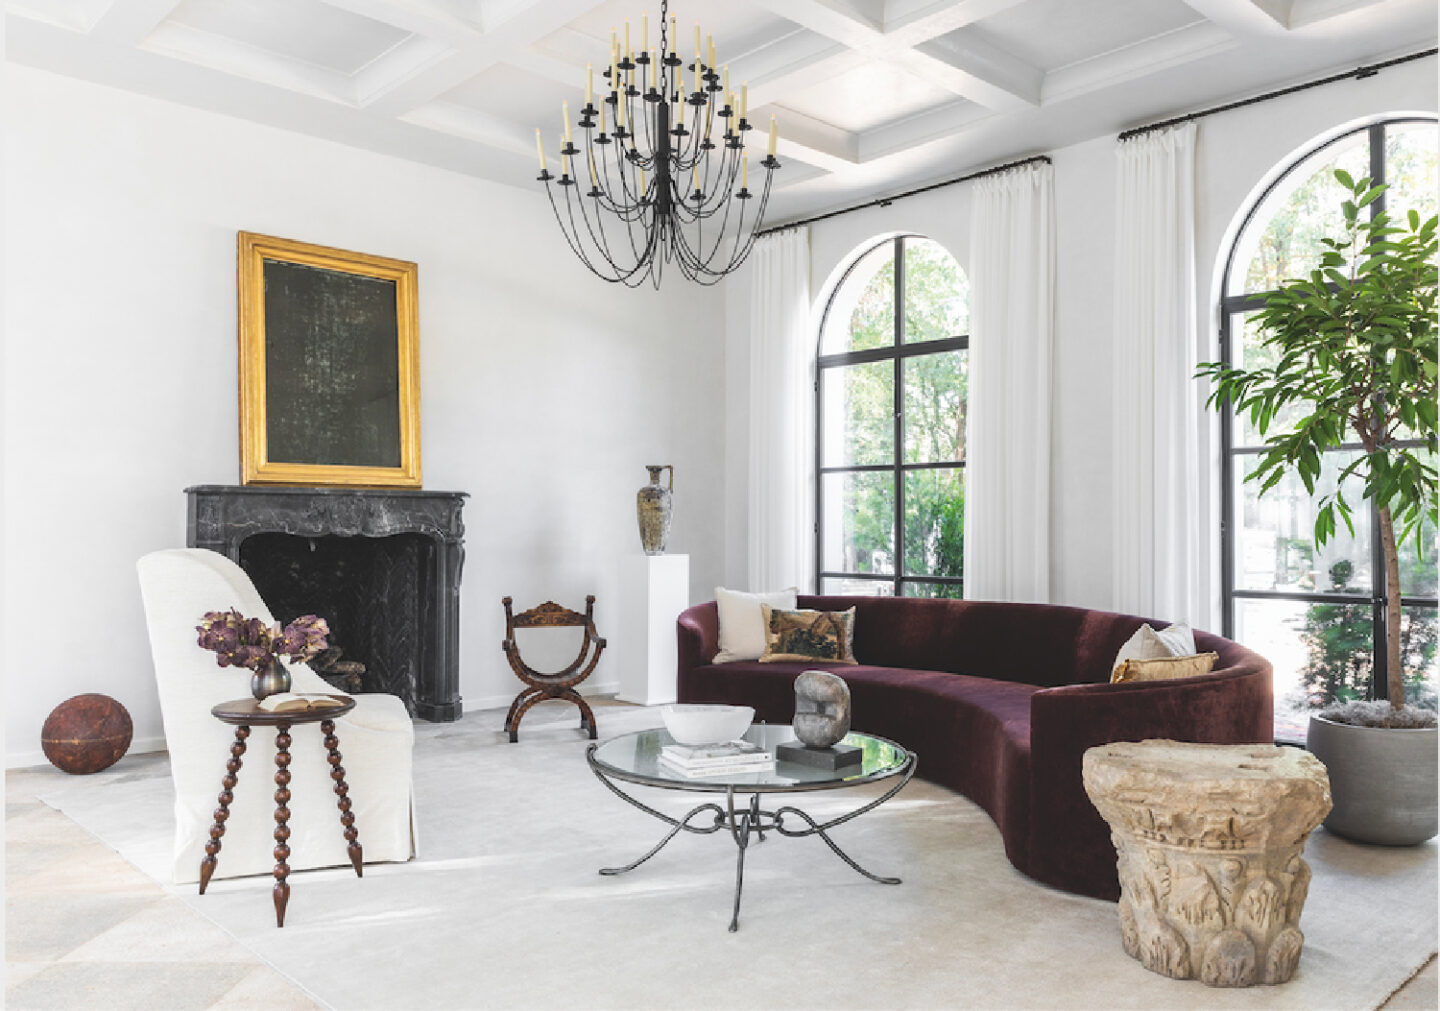 Beautiful living room in Marie Flanigan's THE BEAUTY OF HOME: Redefining Traditional Interiors (Gibbs Smith, 2020).